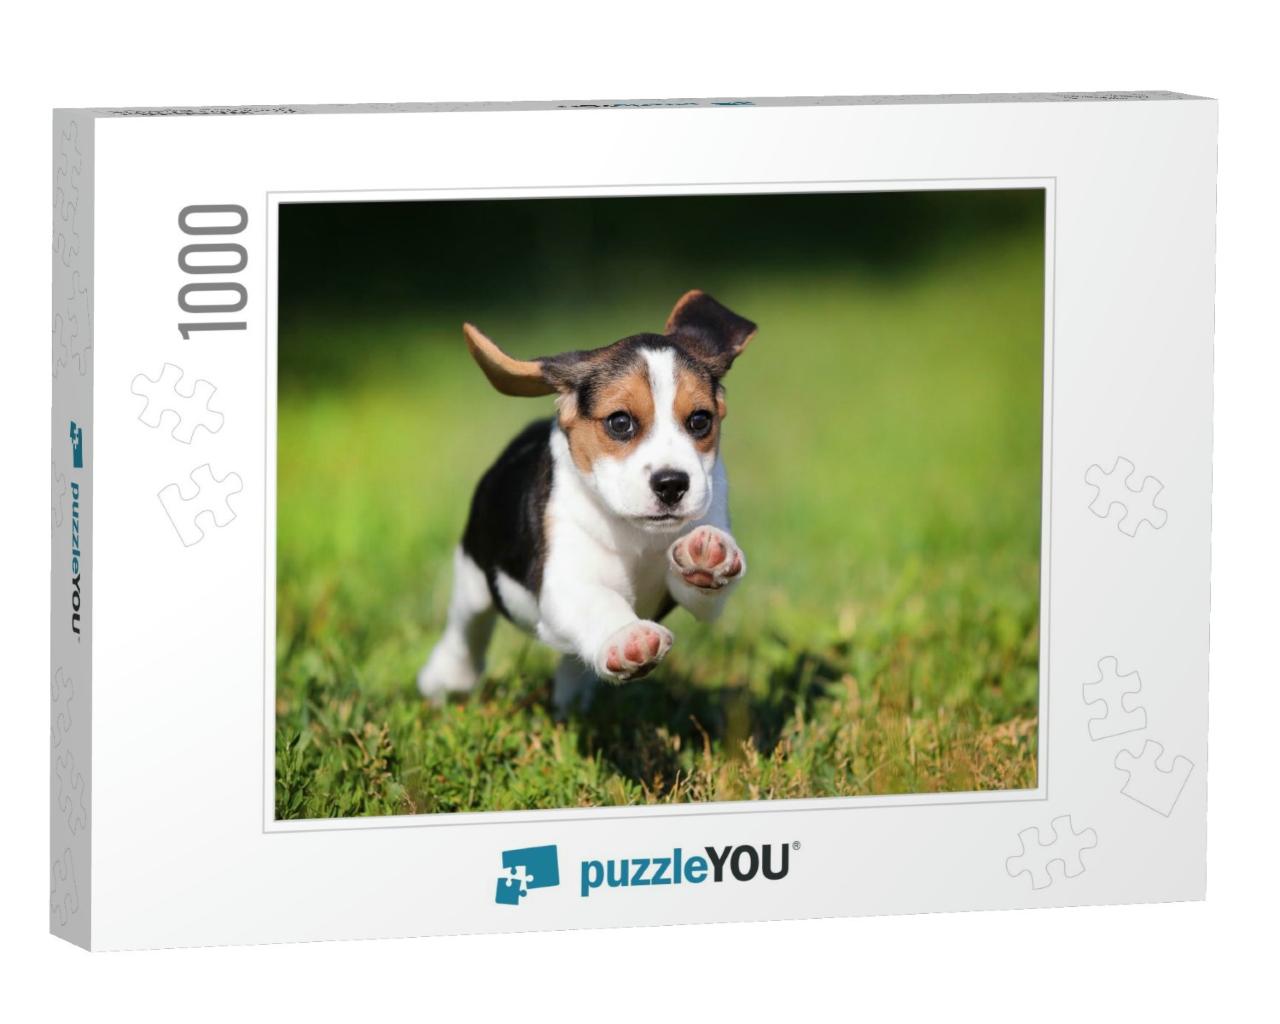 Happy Beagle Puppy Running on the Grass... Jigsaw Puzzle with 1000 pieces